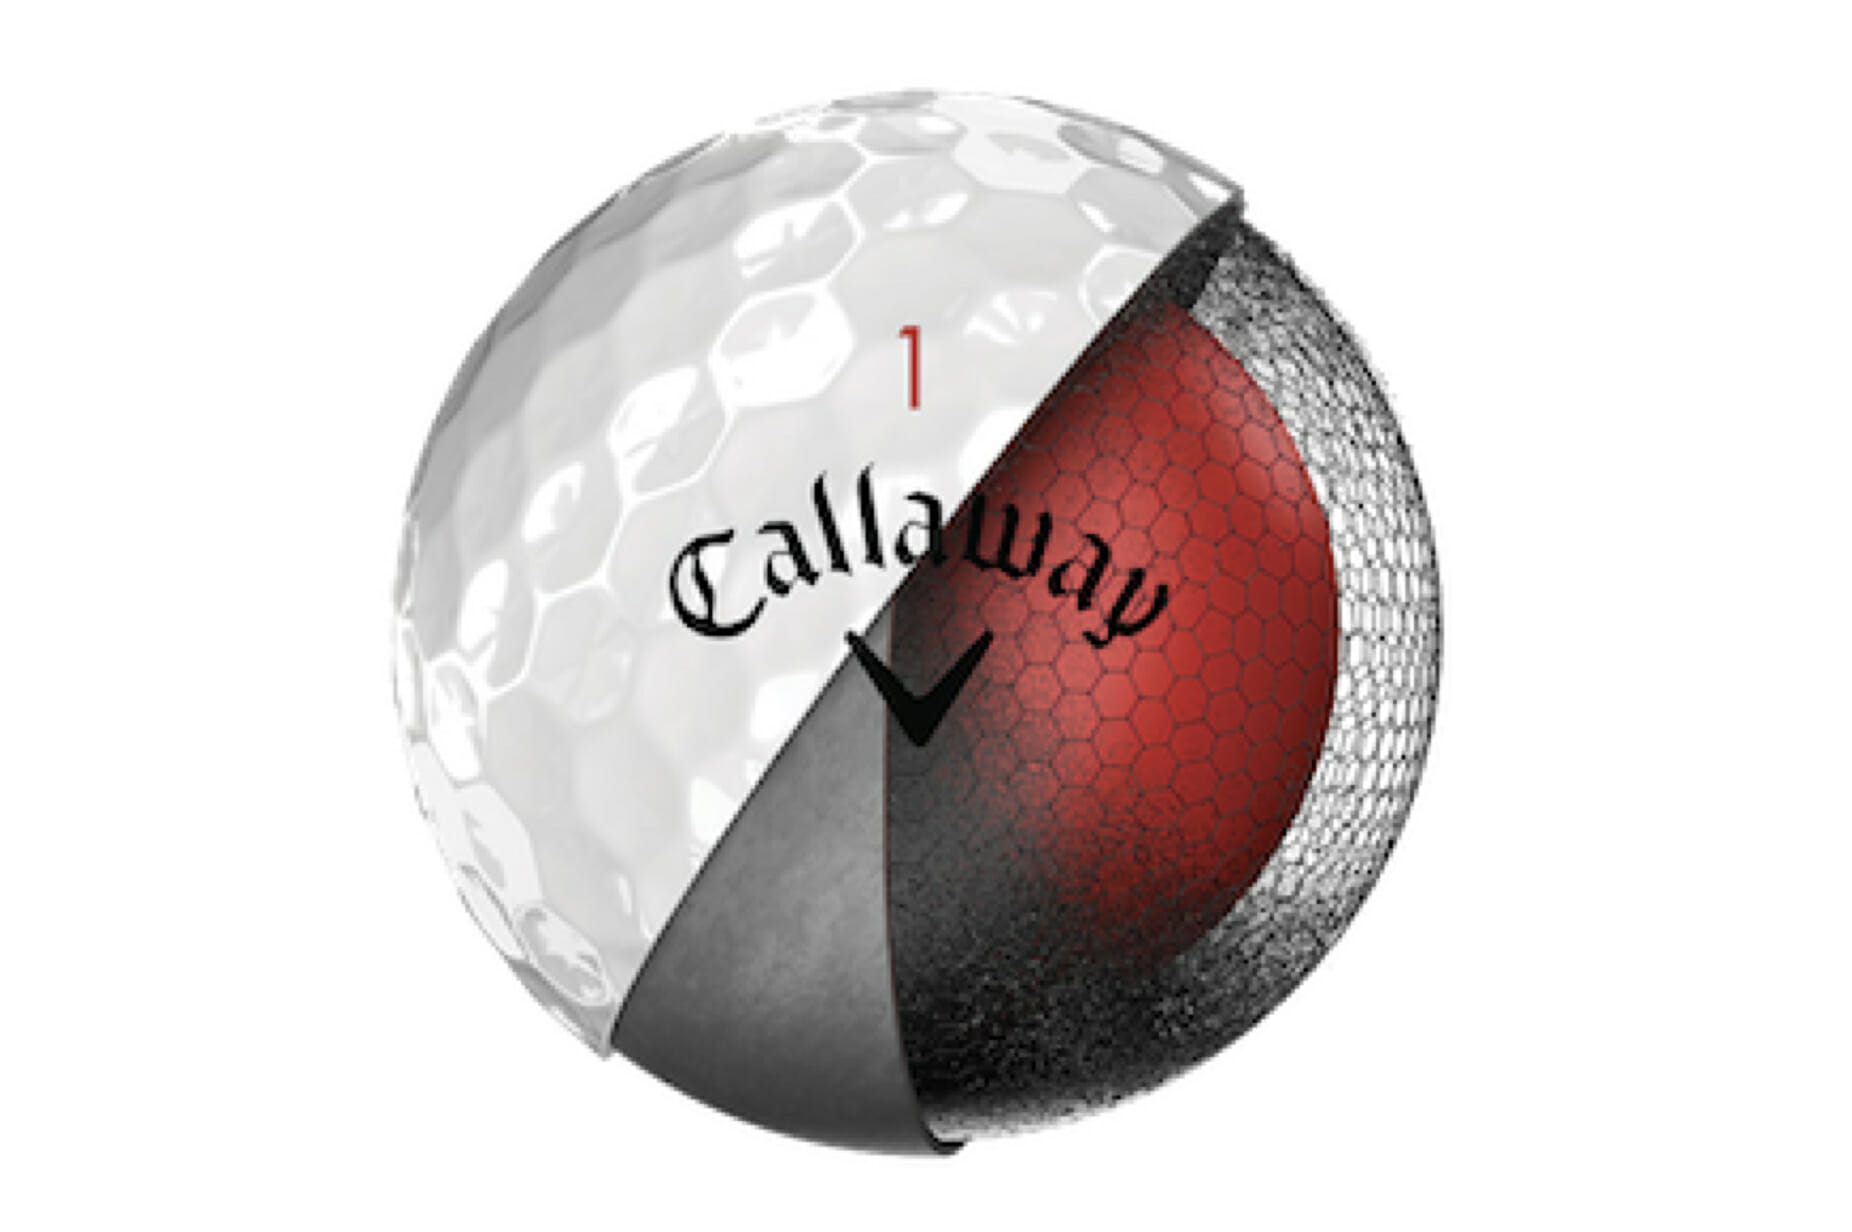 Callaway Chrome Soft and Chrome Soft X now available